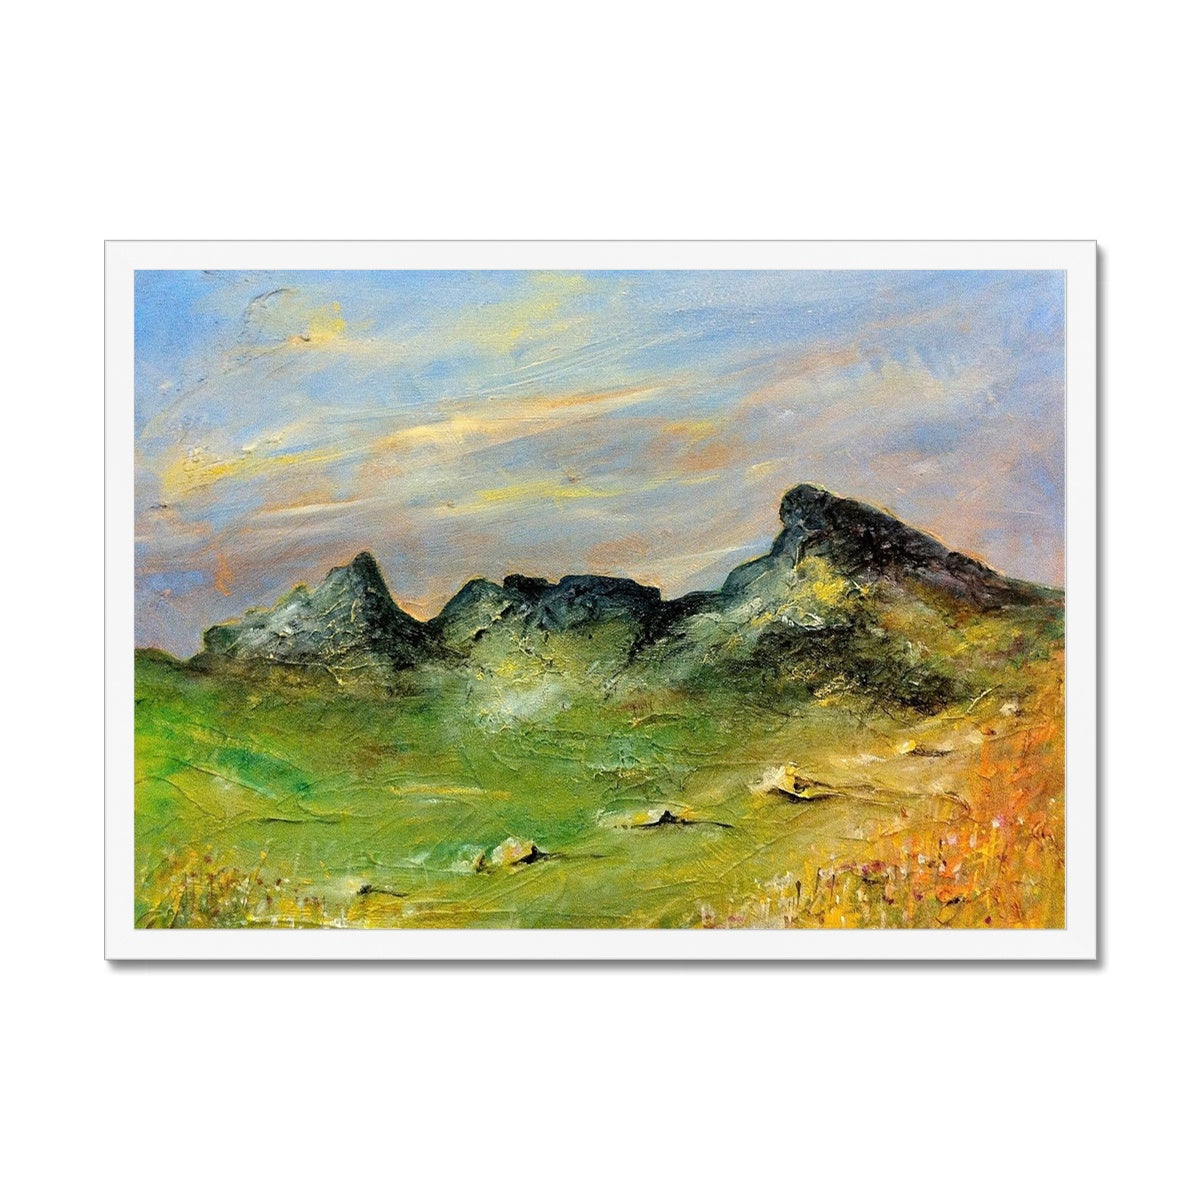 The Cobbler Painting | Framed Prints From Scotland-Framed Prints-Scottish Lochs & Mountains Art Gallery-A2 Landscape-White Frame-Paintings, Prints, Homeware, Art Gifts From Scotland By Scottish Artist Kevin Hunter